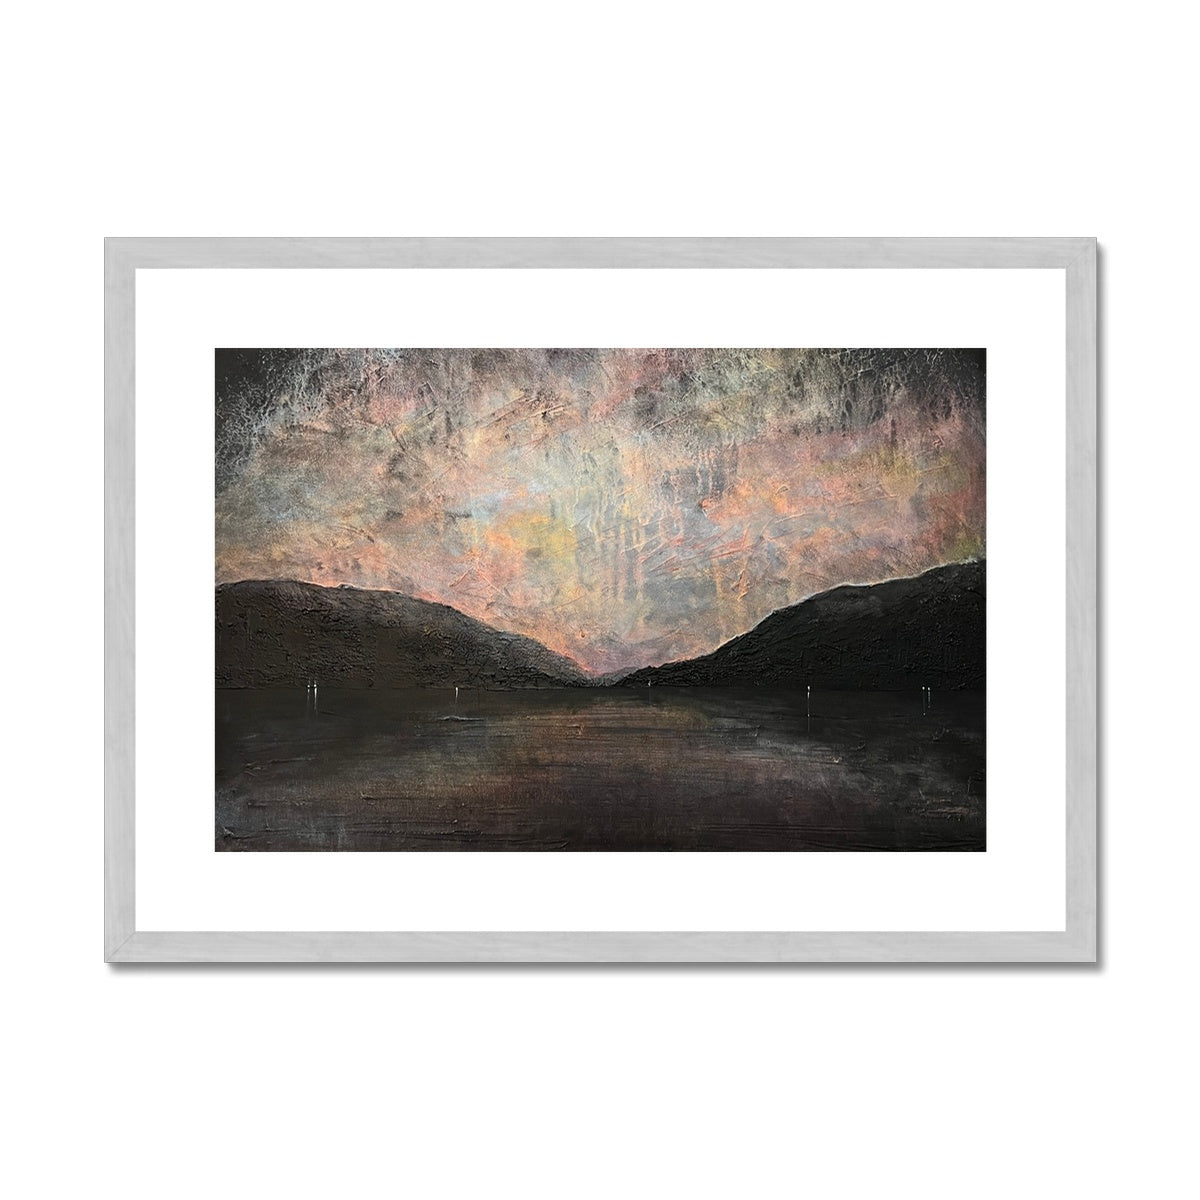 A Brooding Loch Lomond Painting | Antique Framed & Mounted Prints From Scotland-Antique Framed & Mounted Prints-Scottish Lochs & Mountains Art Gallery-A2 Landscape-Silver Frame-Paintings, Prints, Homeware, Art Gifts From Scotland By Scottish Artist Kevin Hunter